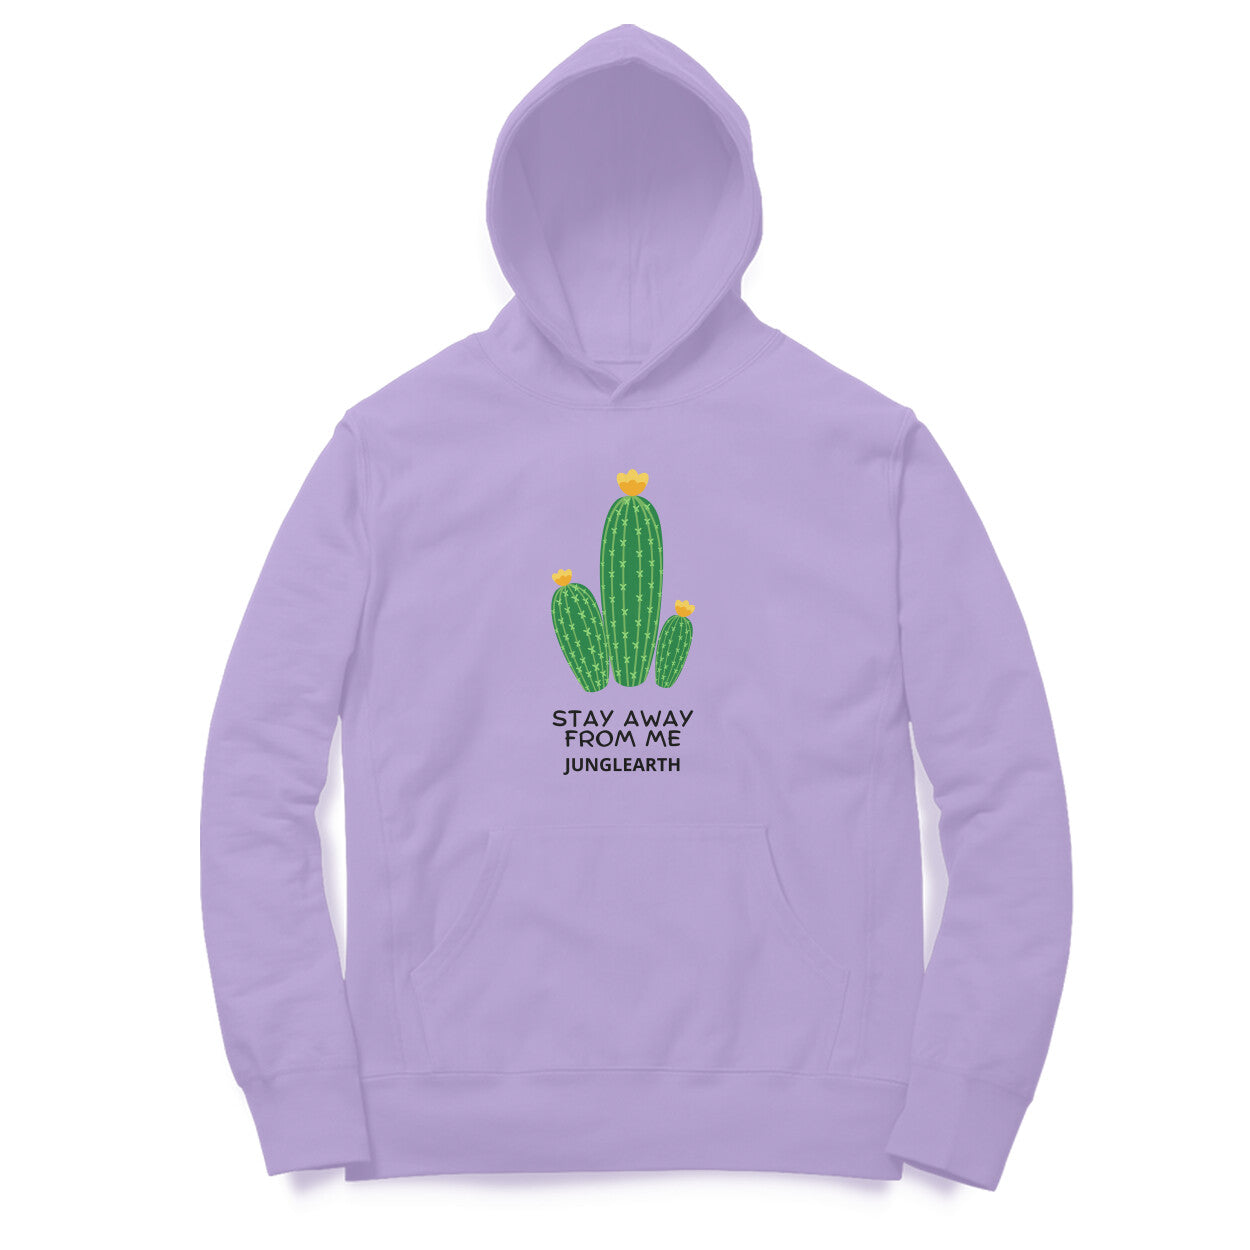 Junglearth White and Green Cactus Hoodie